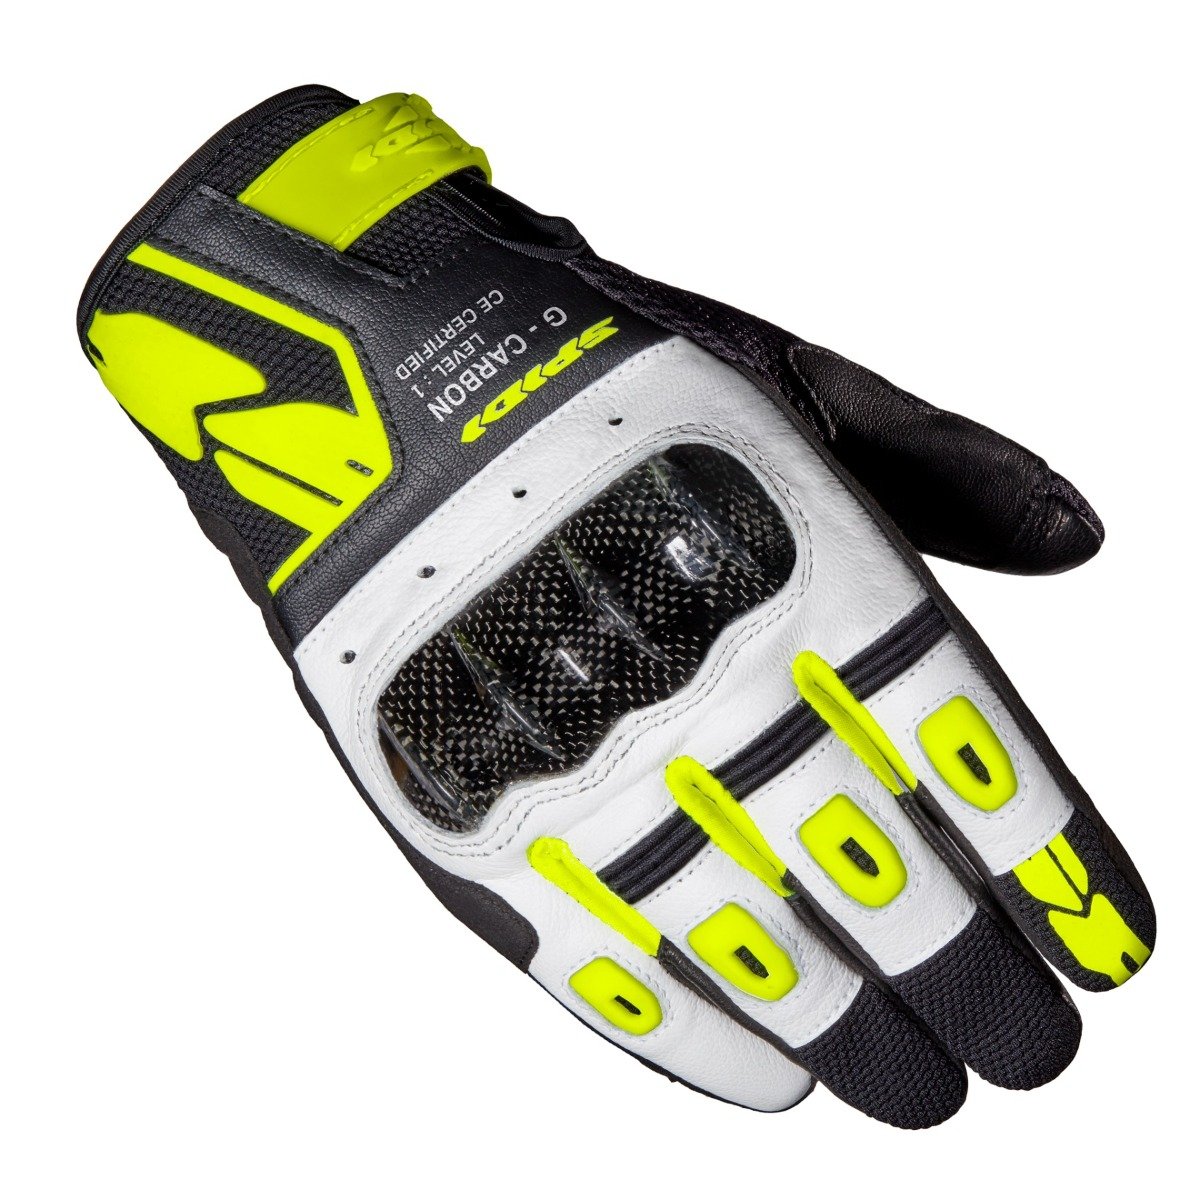 Image of Spidi G-Carbon Black Fluo Yellow Size M ID 8030161314878